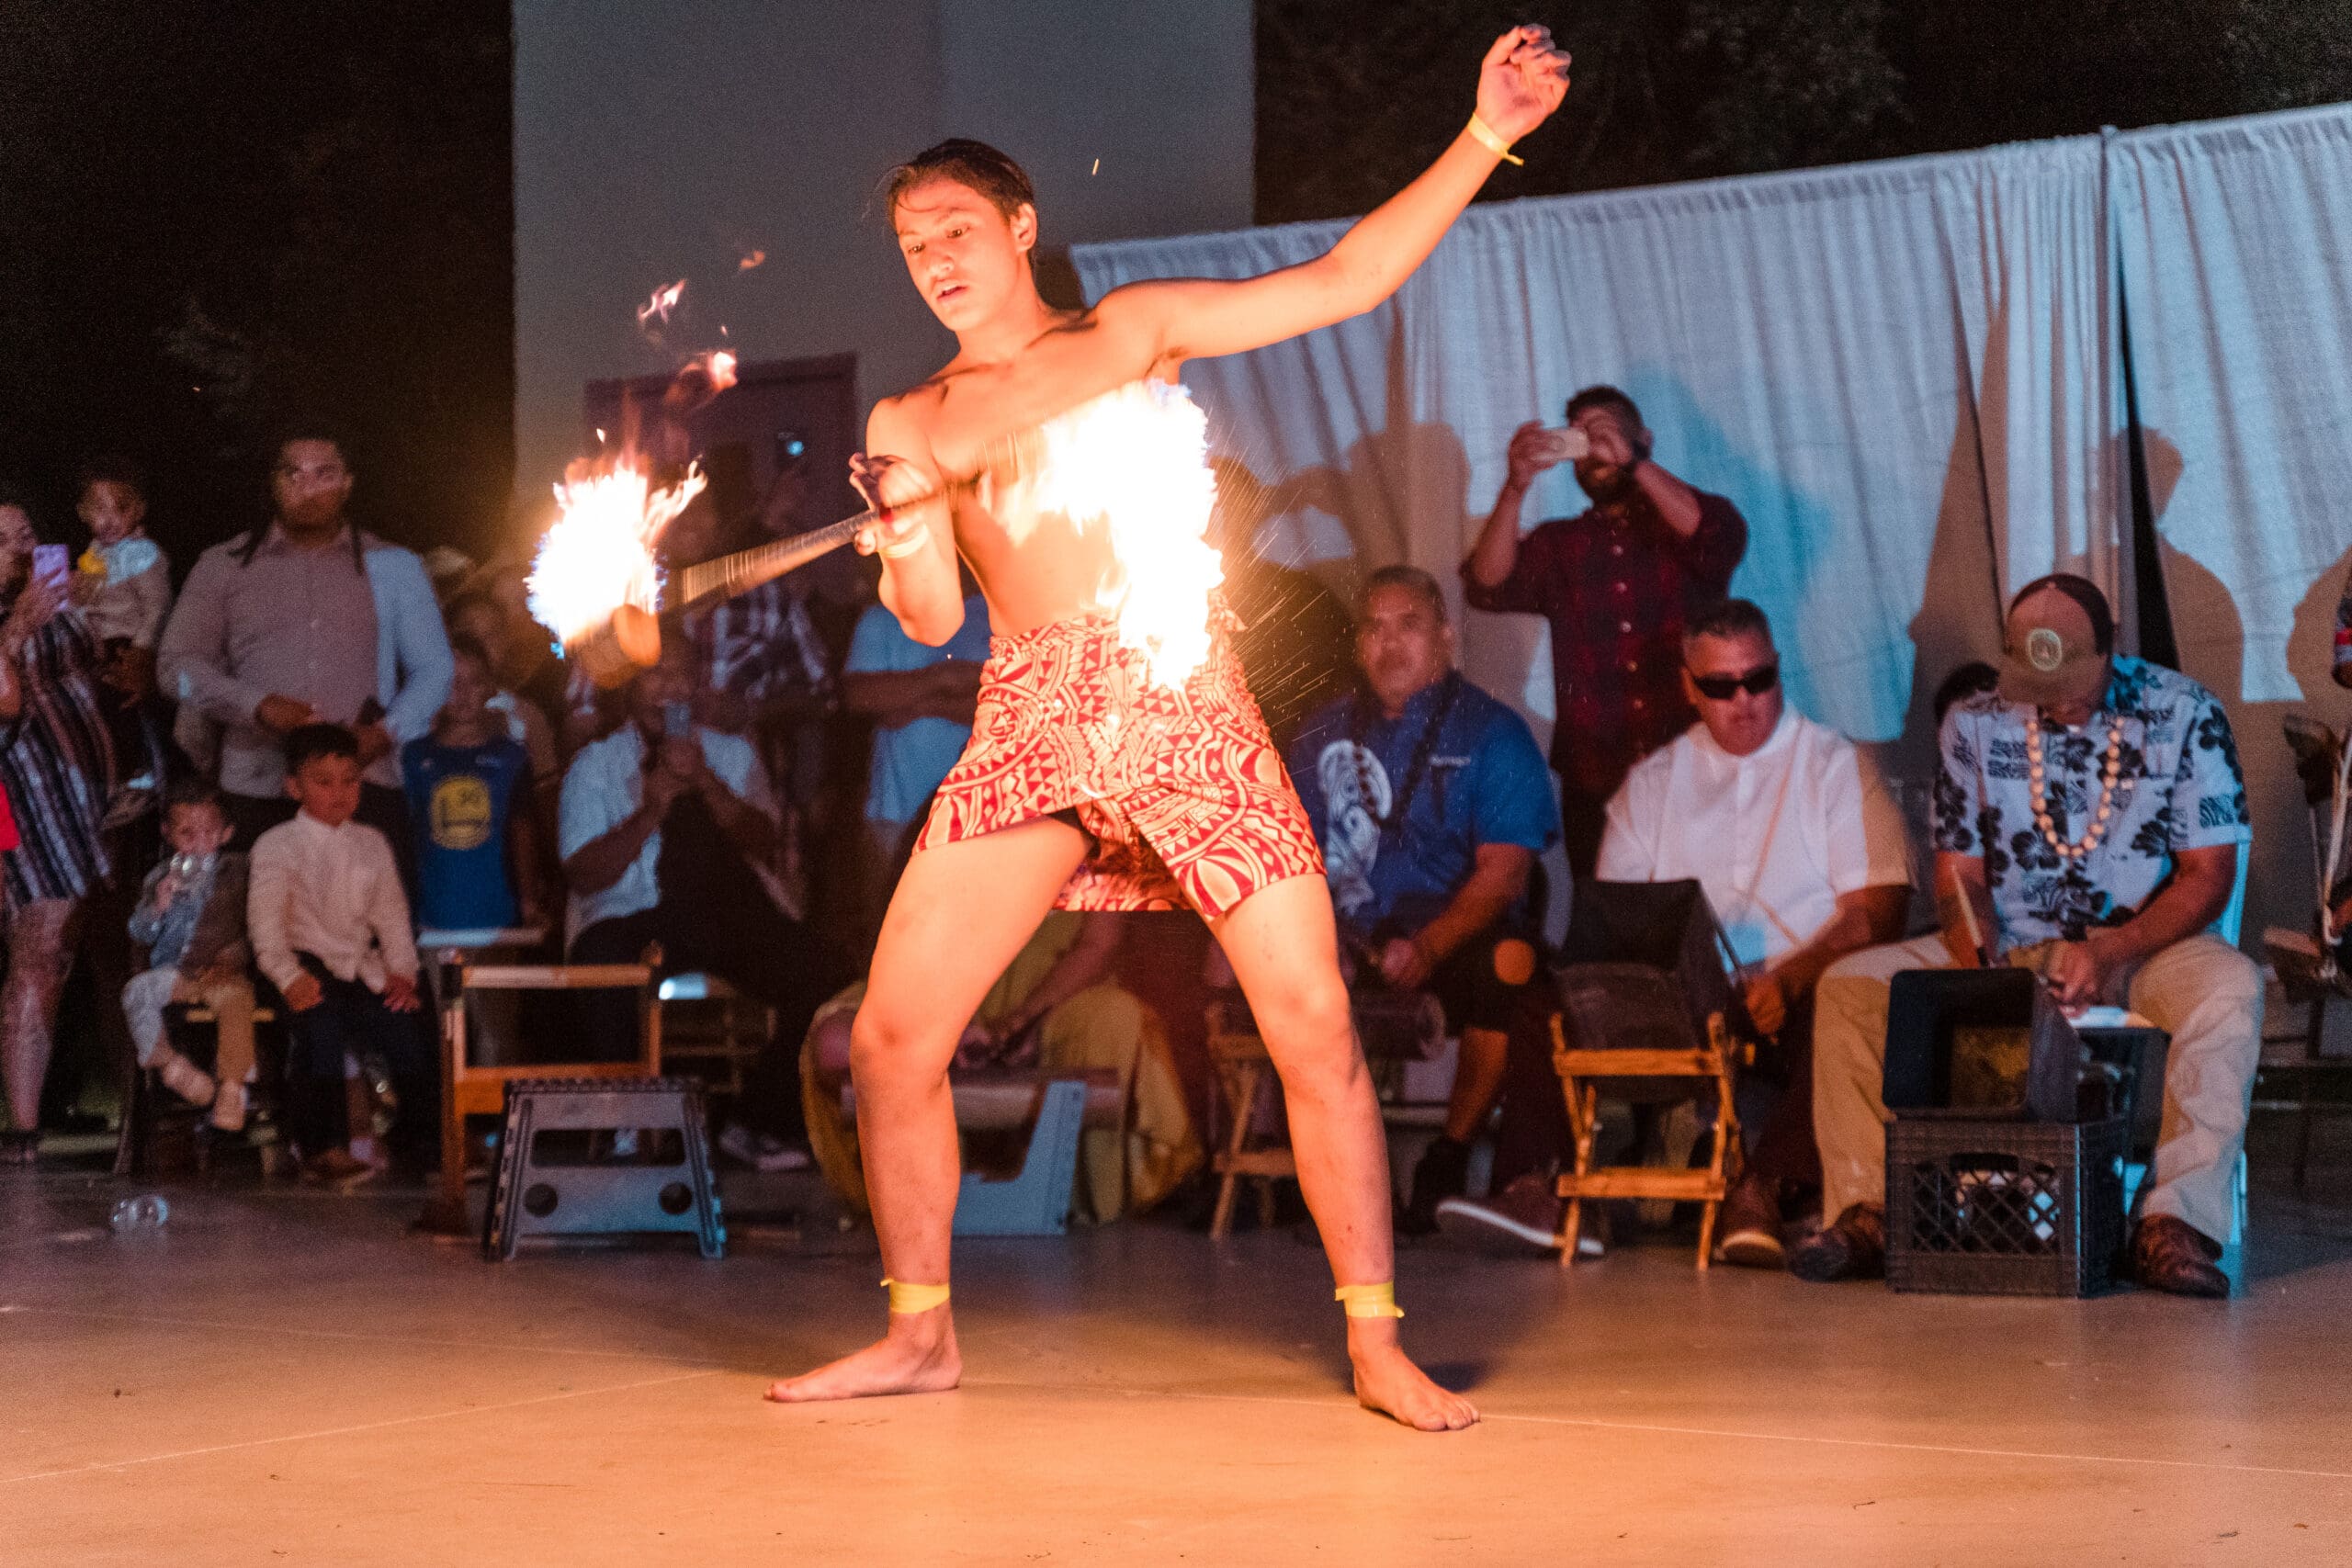 Fire twirler performing at traditional Hawaiian wedding reception, spinning flames in mesmerizing display